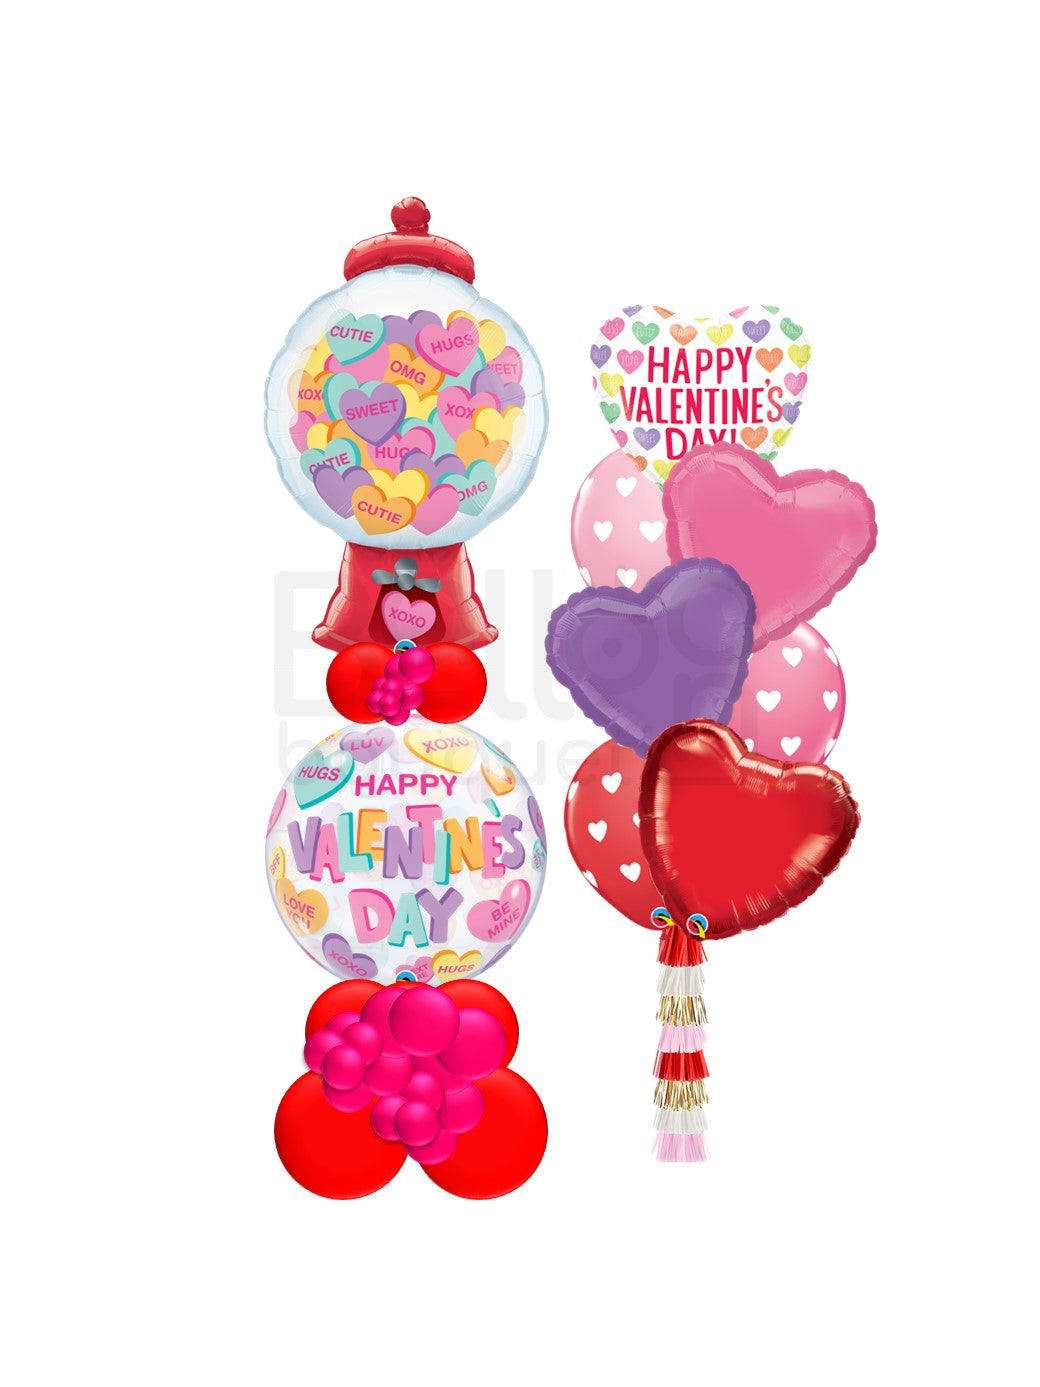 GUMBALL Foil Balloon Party Supplies Decoration 